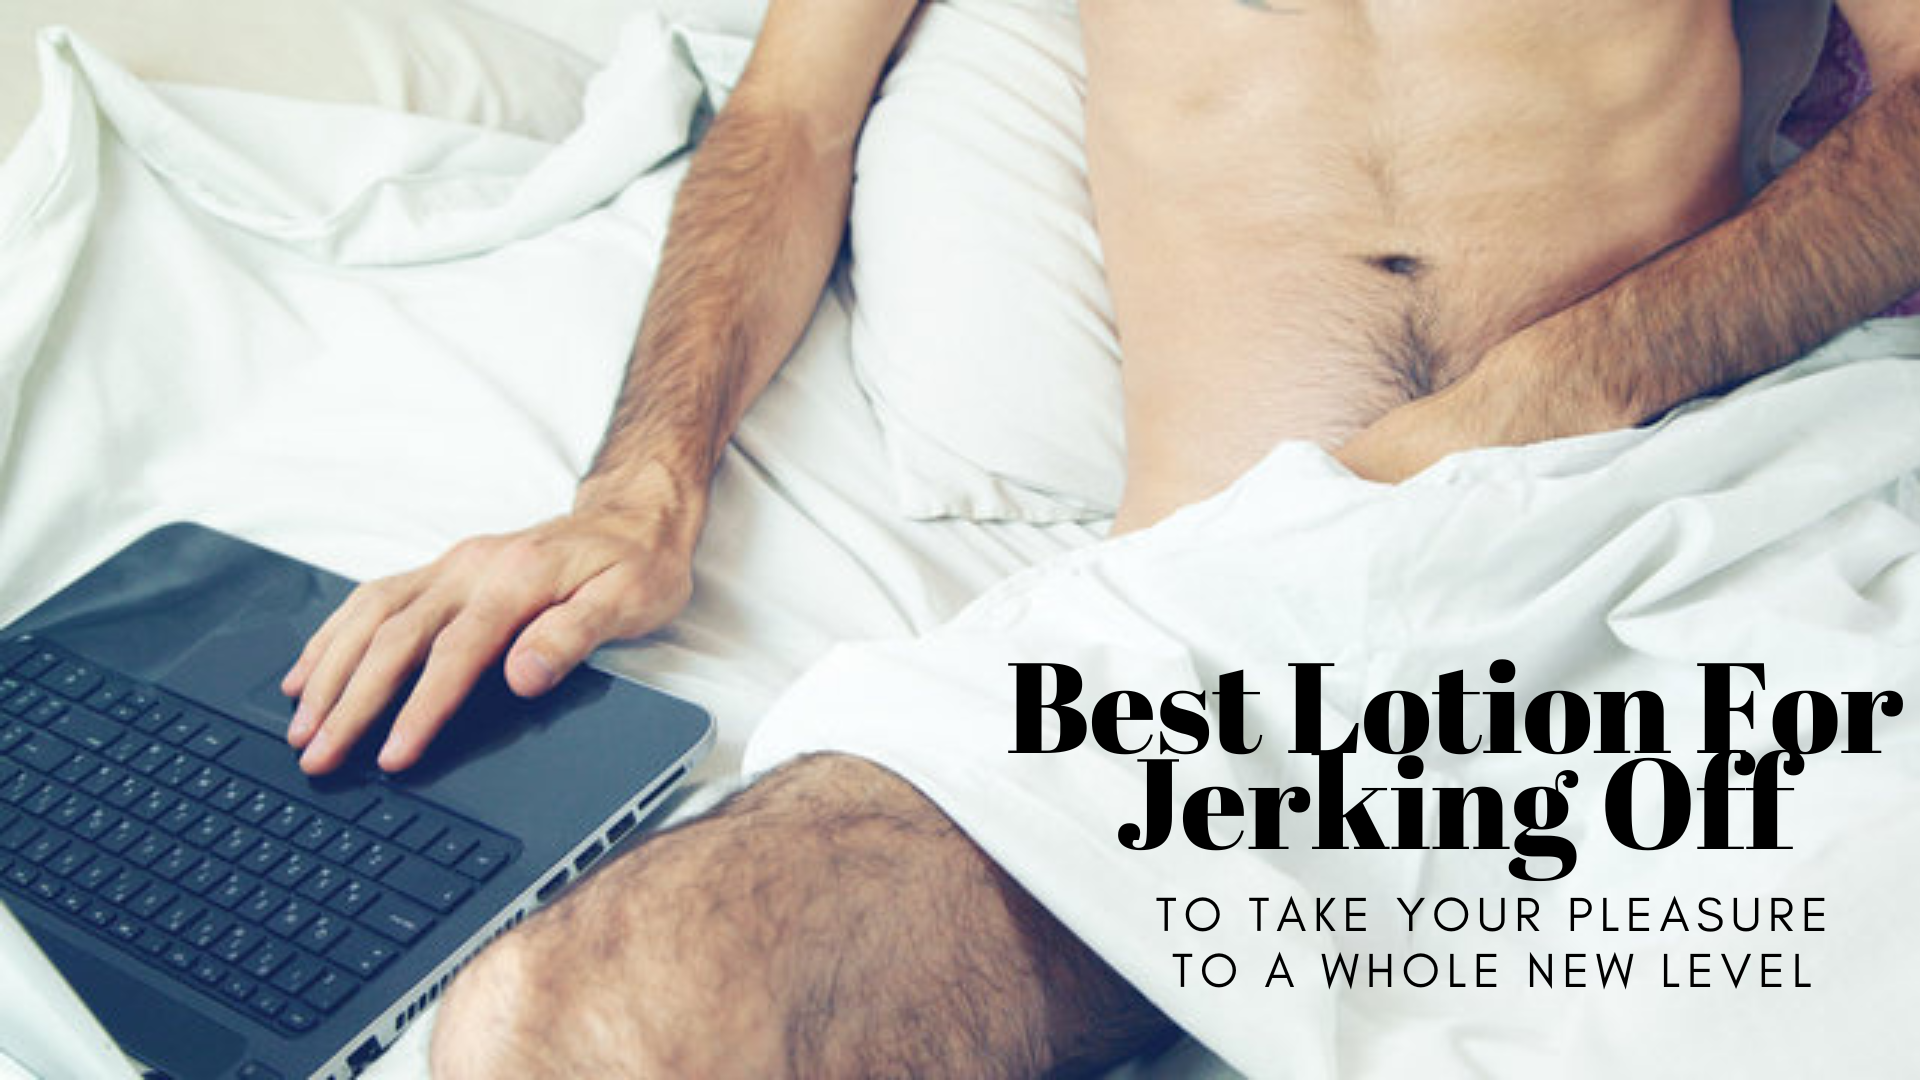 Best Lotion For Jerking Off - Take Your Pleasure To A Whole New Level